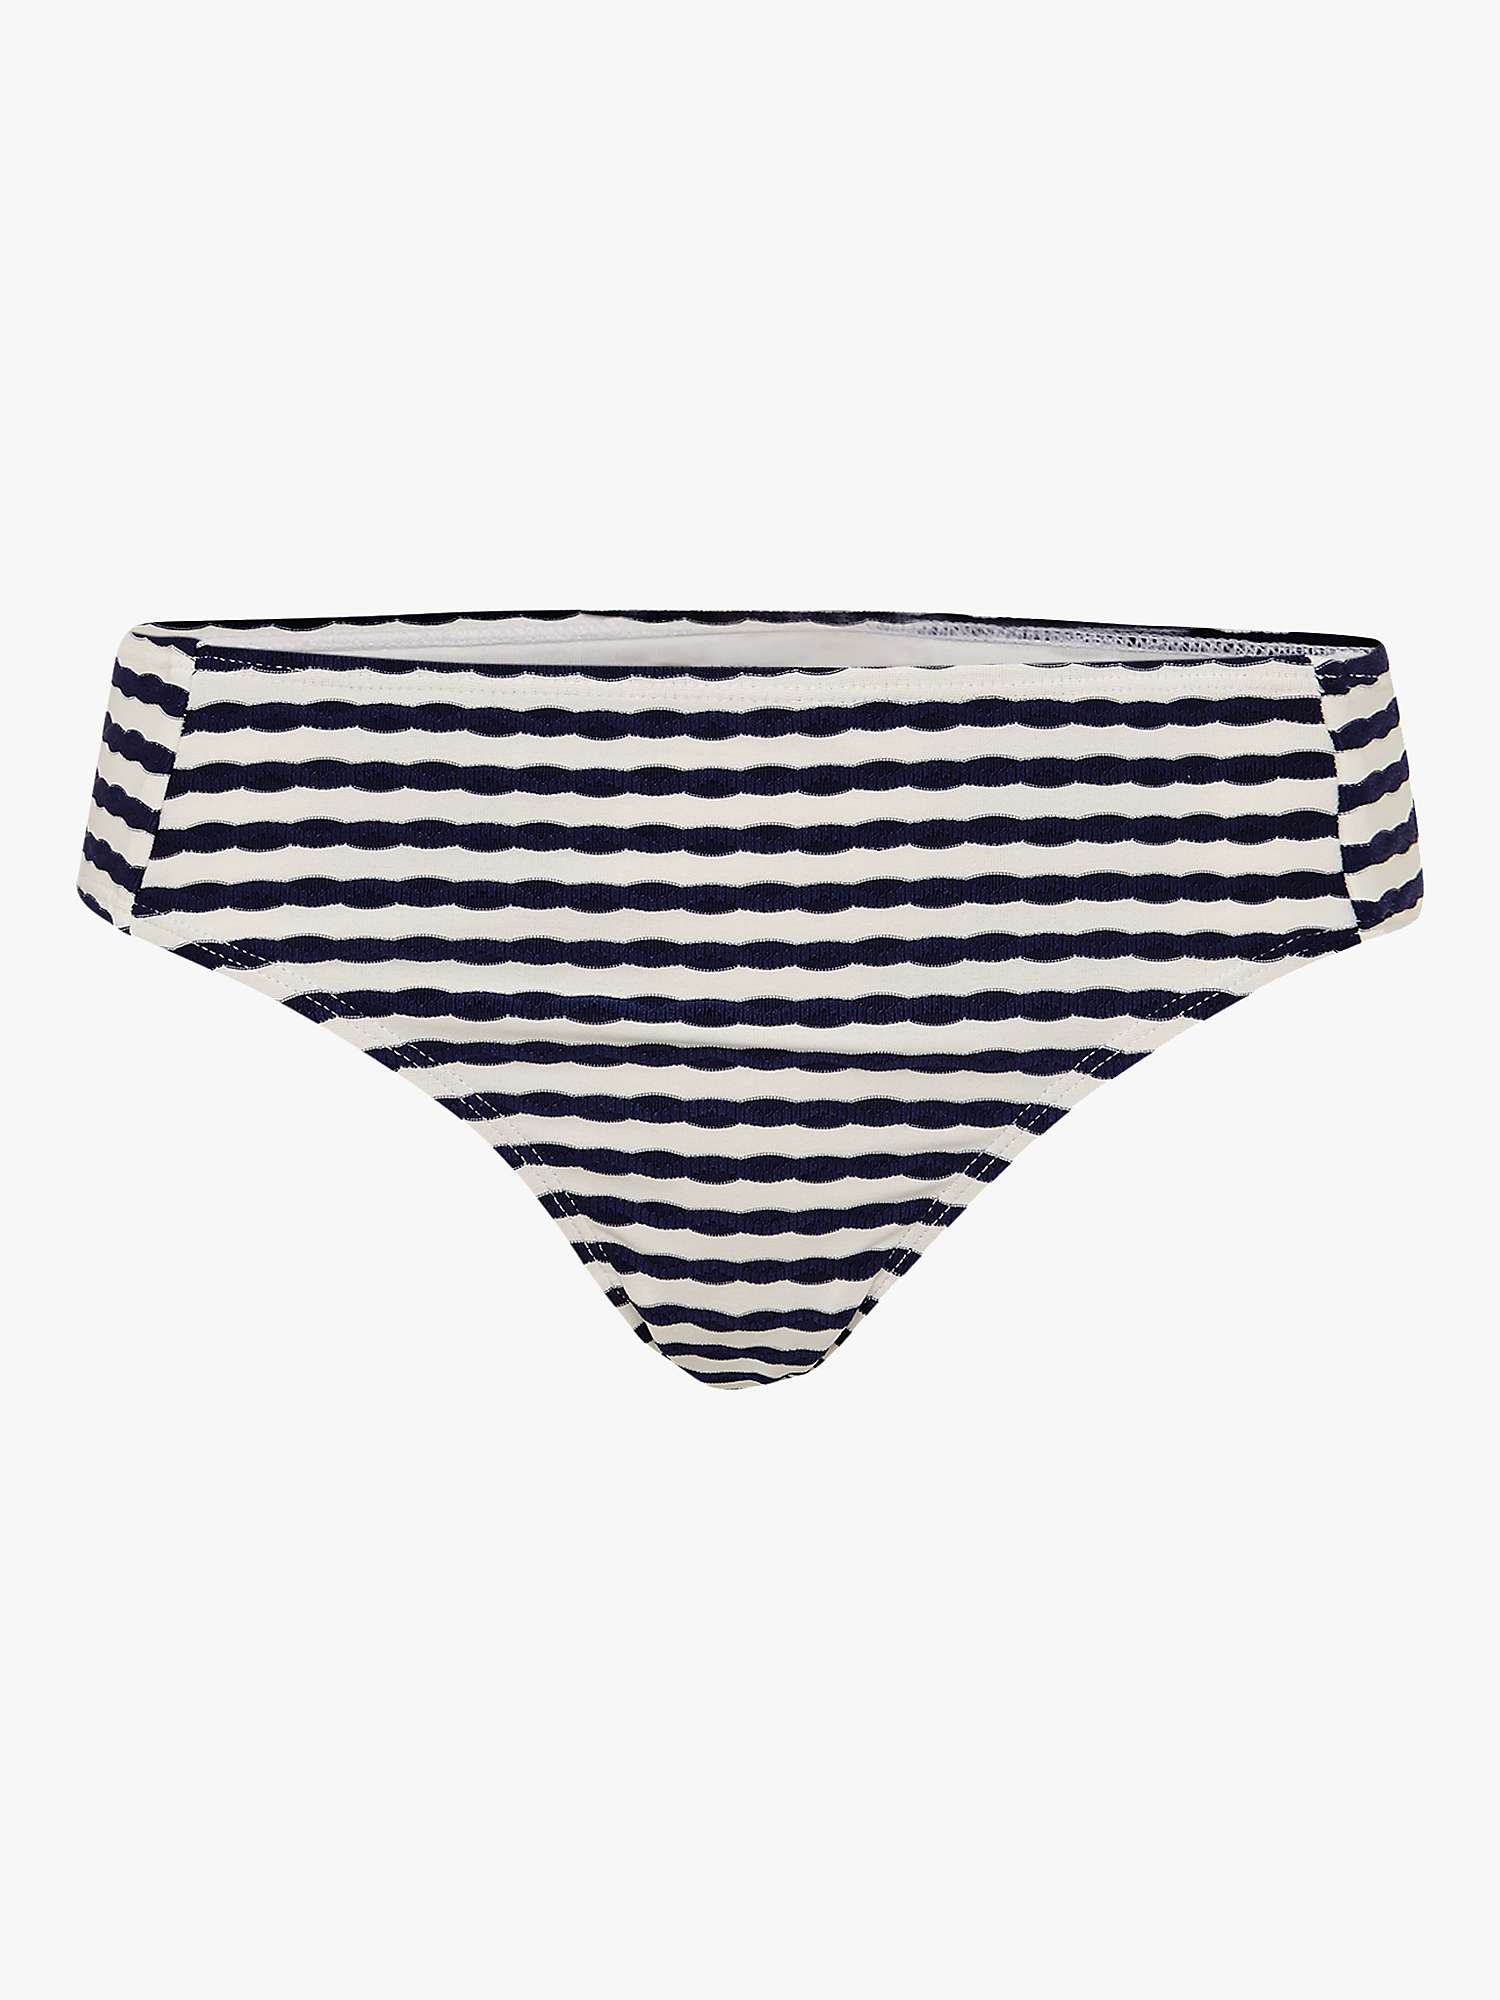 Buy Phase Eight Thea Tankini Bottoms, Navy/Ivory Online at johnlewis.com